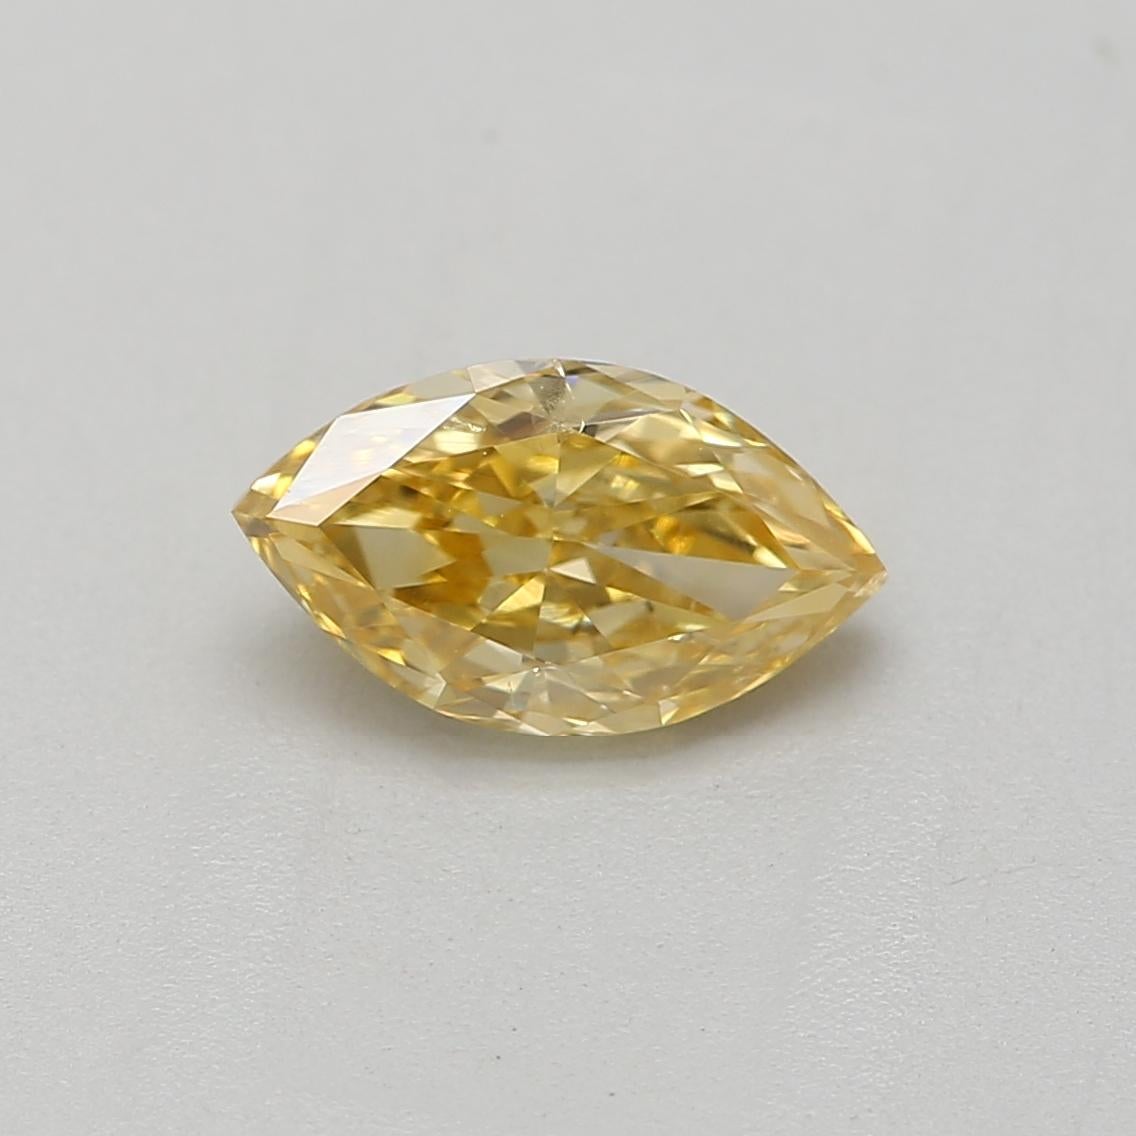 *100% NATURAL FANCY COLOUR DIAMOND*

✪ Diamond Details ✪

➛ Shape: Marquise
➛ Colour Grade: Fancy Intense Orangy Yellow
➛ Carat: 0.44
➛ Clarity: I1
➛ GIA Certified 

^FEATURES OF THE DIAMOND^

Our 0.44 carat diamond falls into the category of small